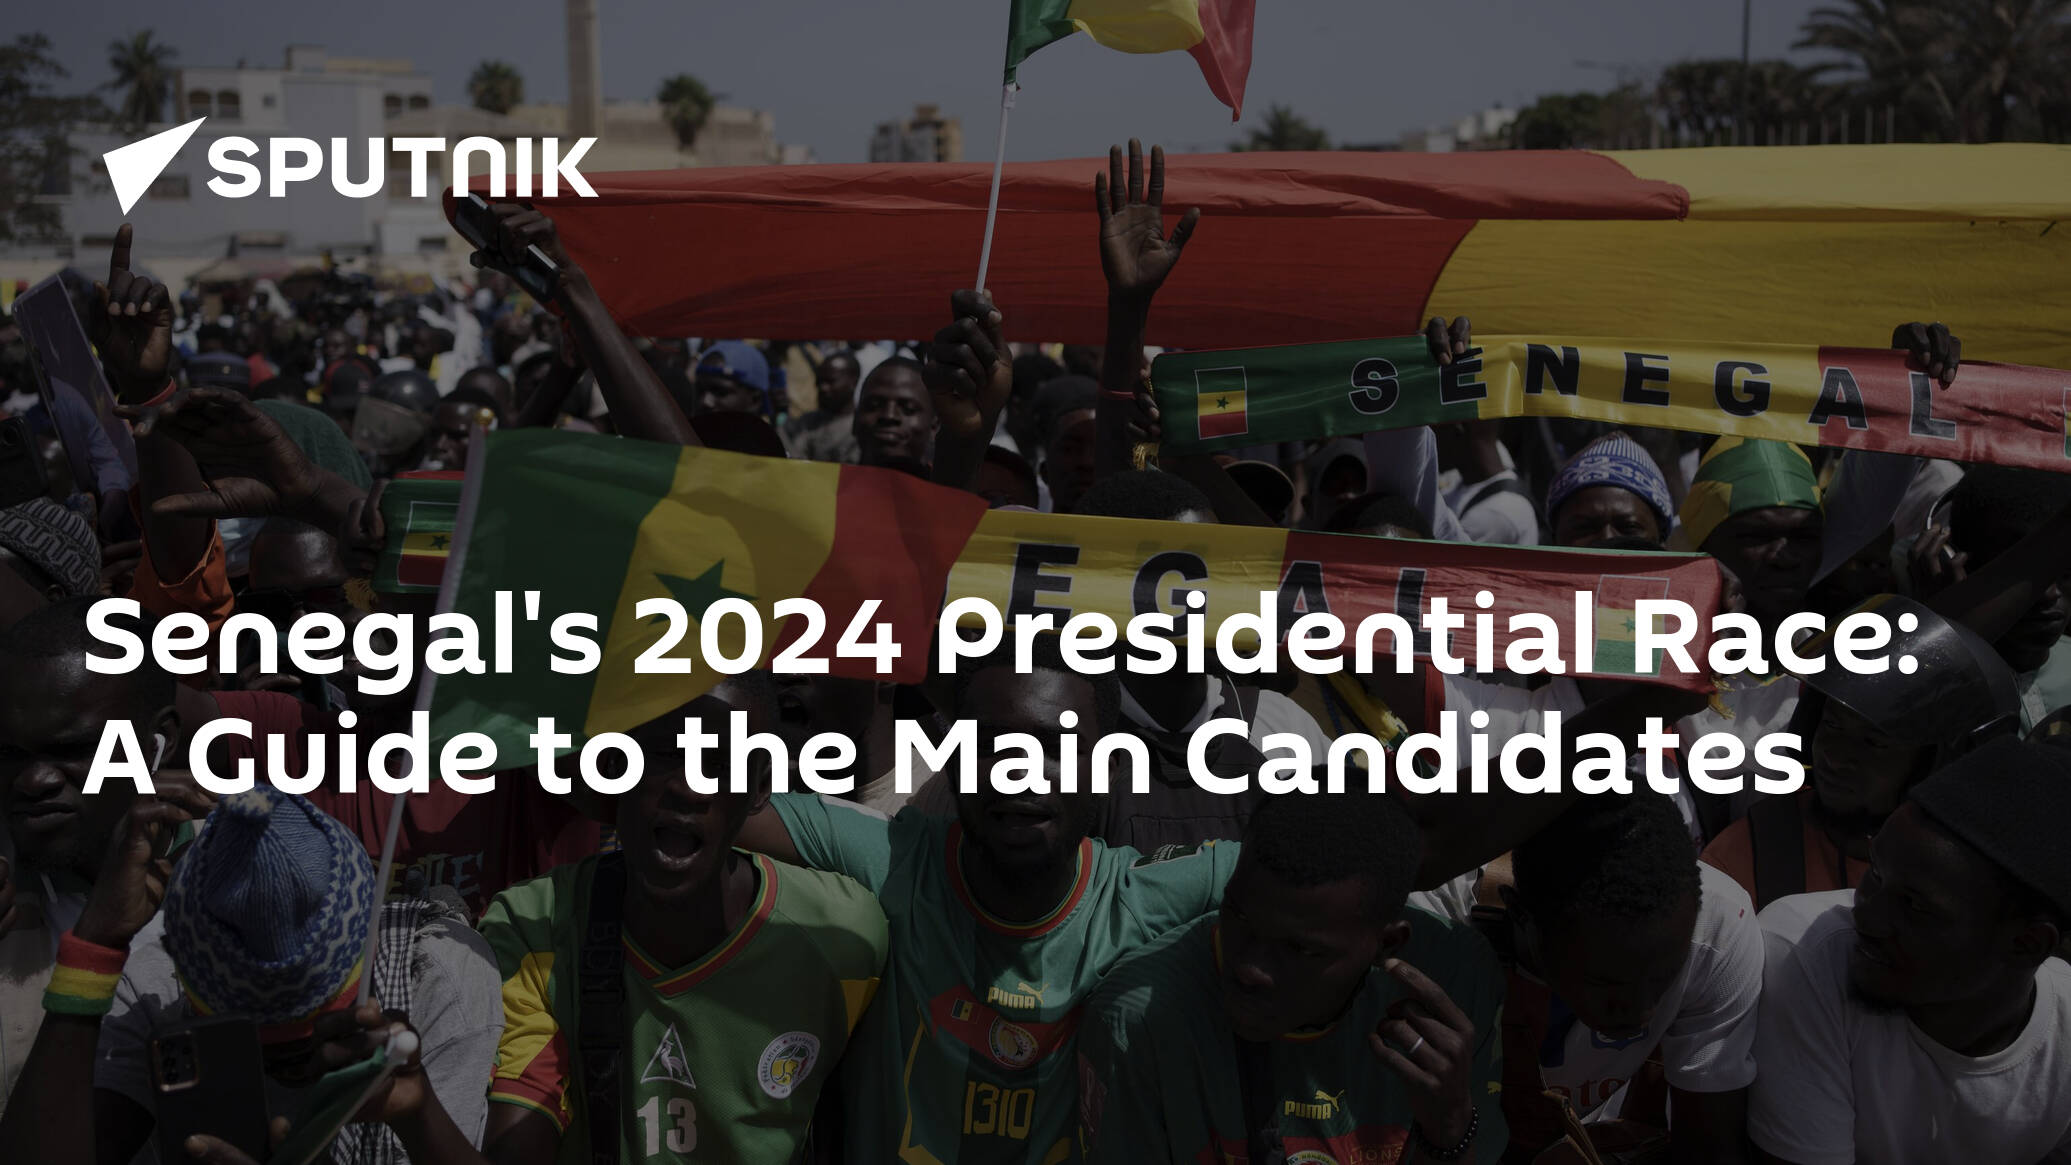 Senegal's 2024 Presidential Race A Guide to the Main Candidates 02.